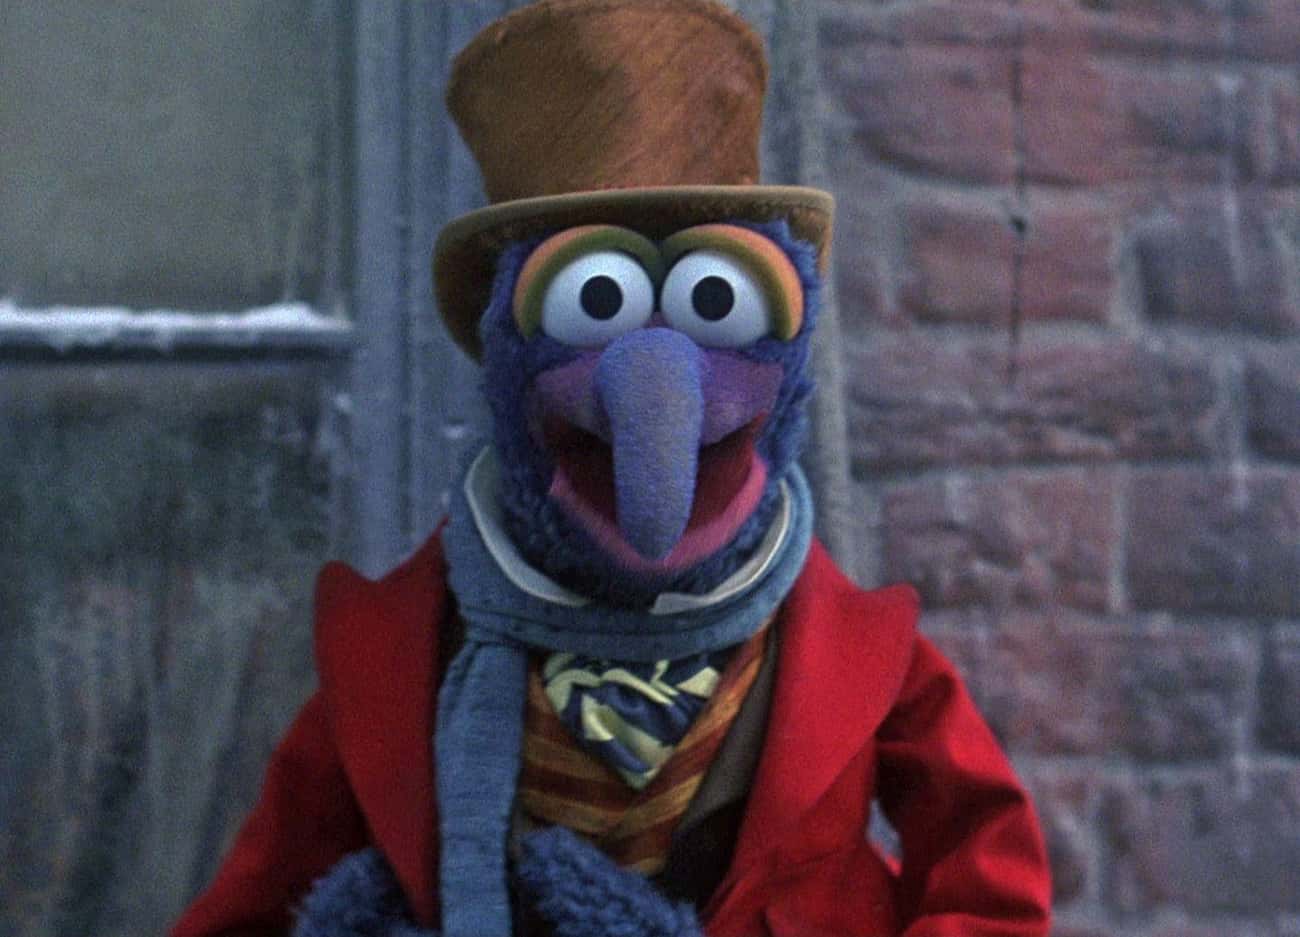 In ‘The Muppet Christmas Carol,’ The Narration, Not Just The Dialogue, Features Charles Dickens’s Prose Word For Word (Spoken By Gonzo) 